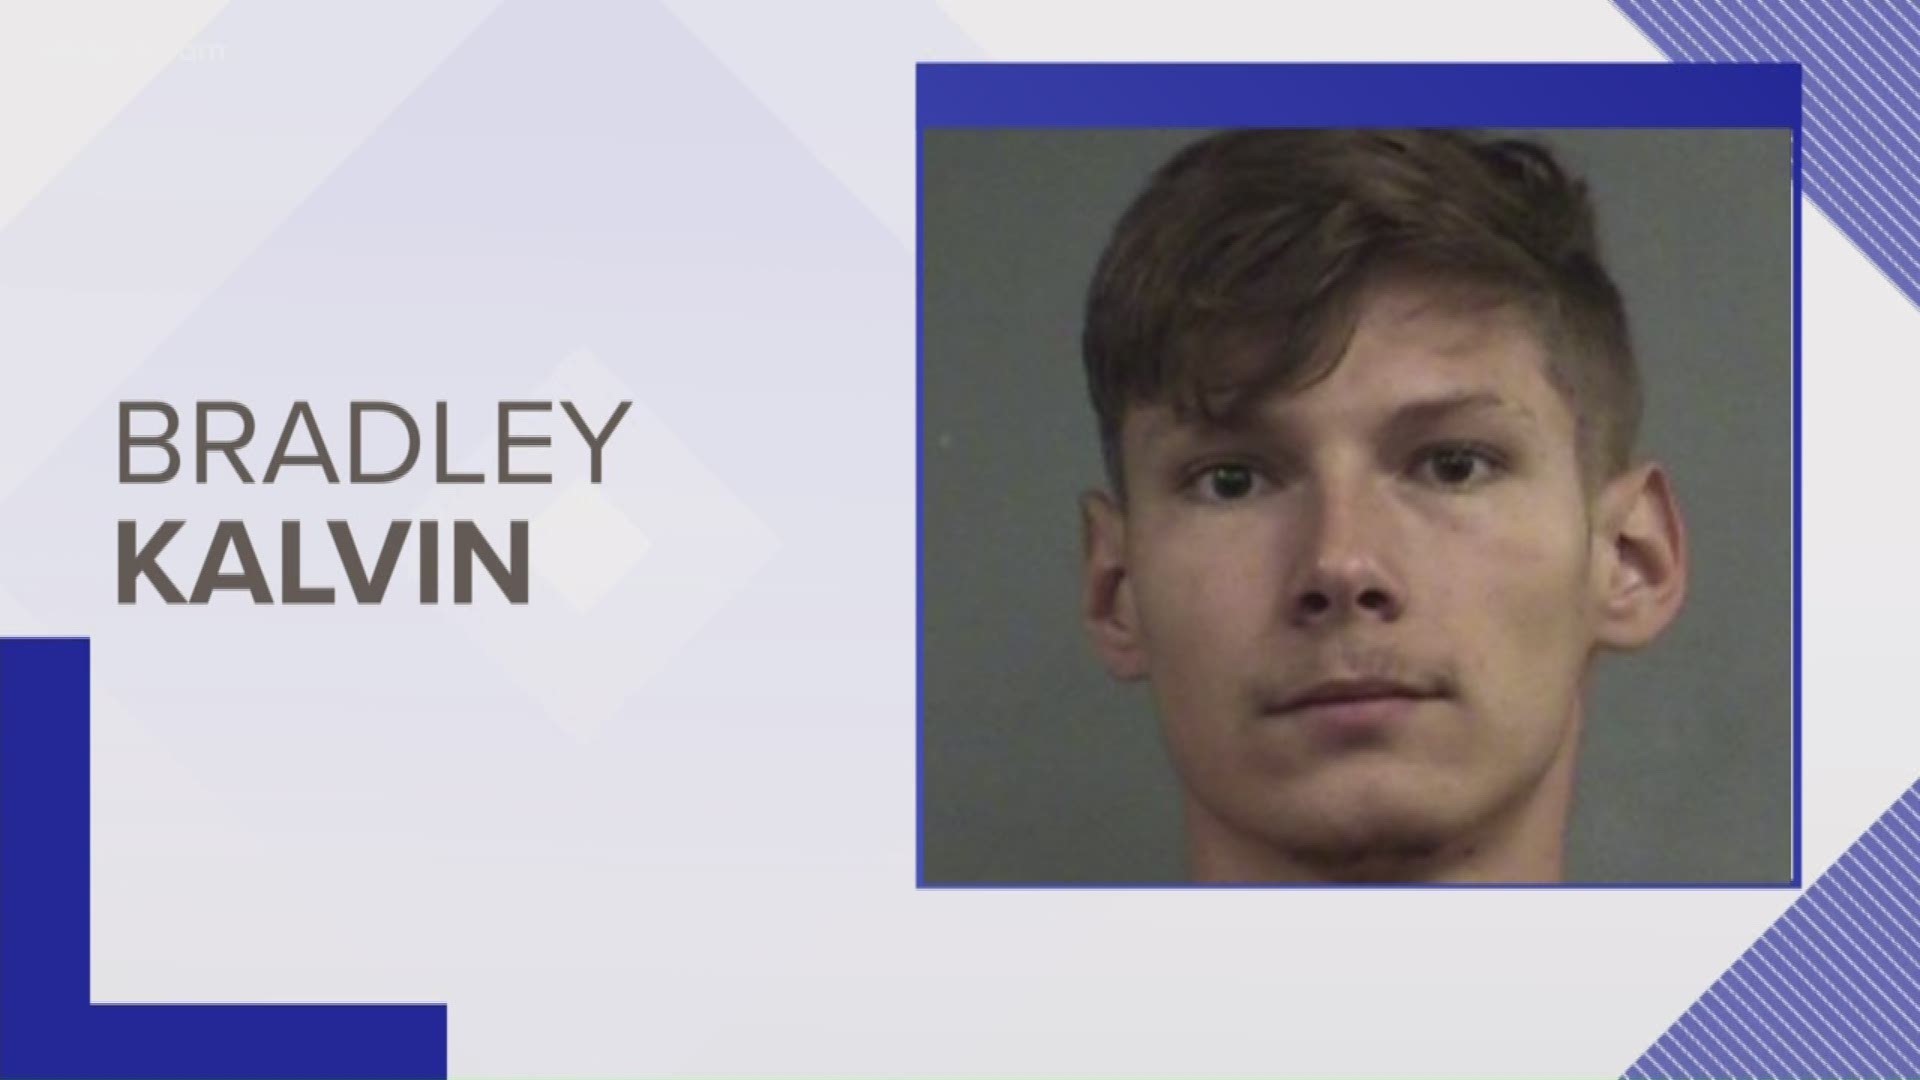 Bradley Kalvin is facing charges after a shooting of a man in Cherokee Park Saturday night. He died Sunday from his injuries.